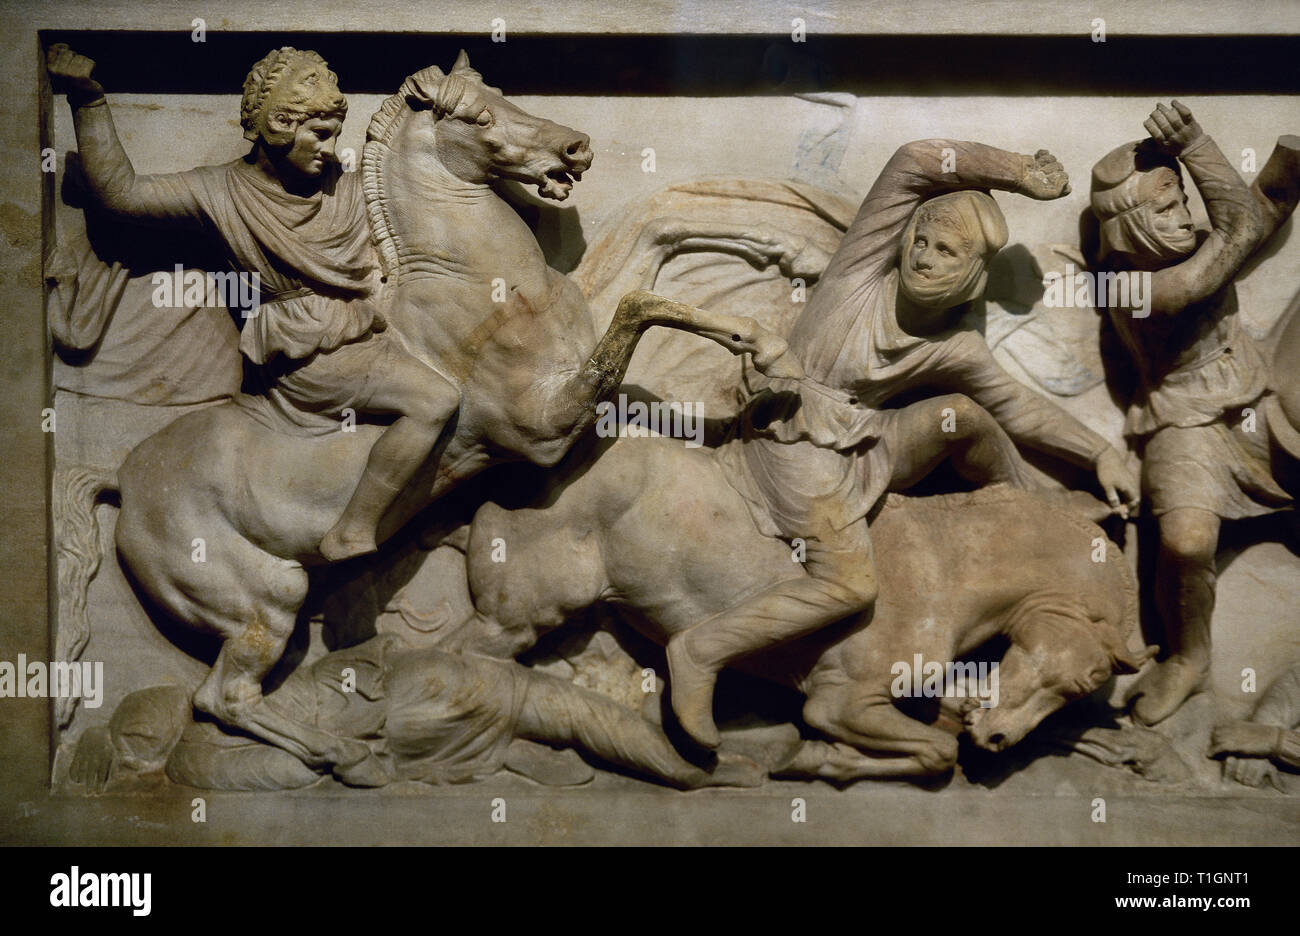 Sarcophagus of Alexander the Great (late 4th century BC). It was found in the royal necropolis of Sidon (Sayda). Pentelic marble. High relief of one of the lateral sides. Detail depicting a battle between Greeks and Persians (with long pants, anaxyrides). On the left, Alexander the Great, with the skin of the head of Lion of Nemesis, chasing a Persian soldier. Archaeological Museum. Istanbul, Turkey. Stock Photo